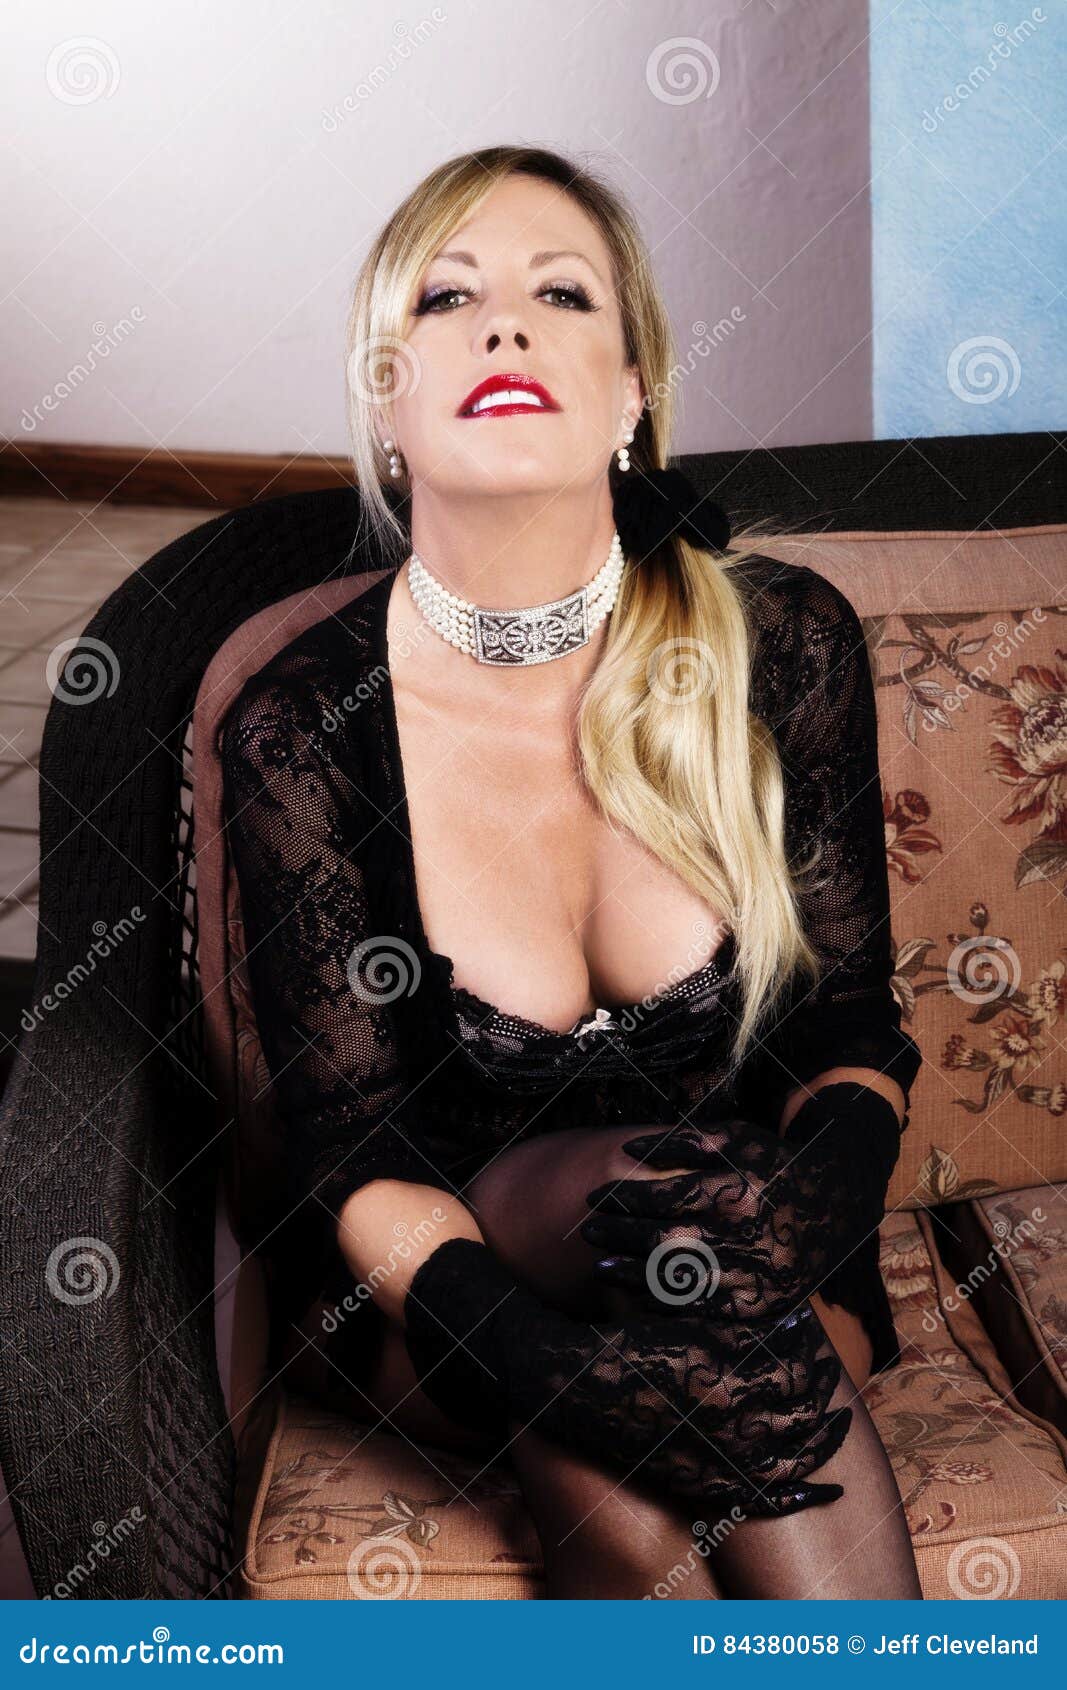 https://thumbs.dreamstime.com/z/older-blond-caucasian-woman-sitting-lace-lingerie-showing-cleavage-black-84380058.jpg